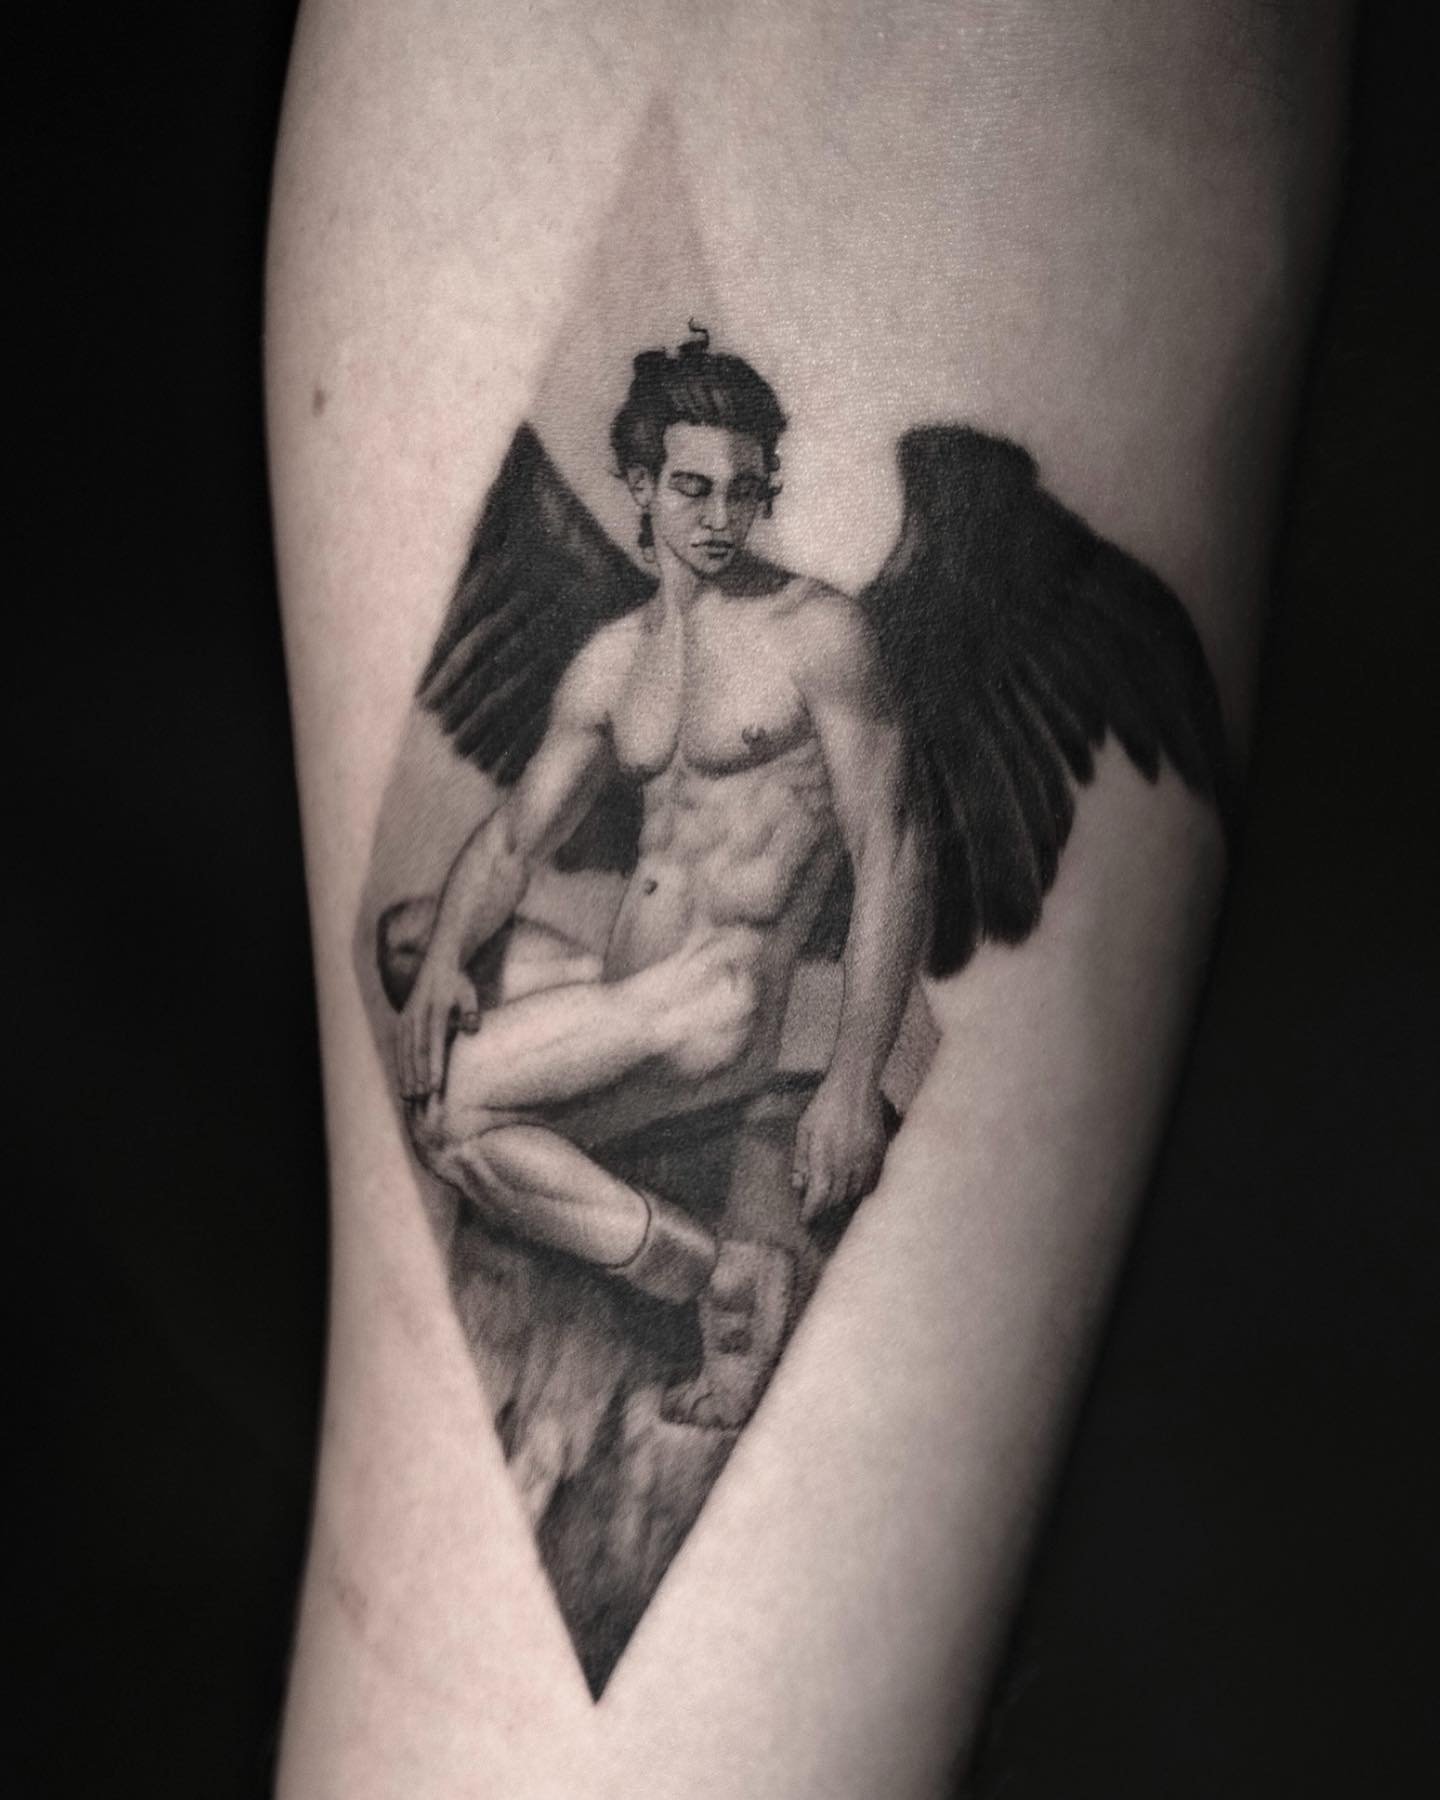 Design based off of a @robertoferri_official painting. I want to tattoo more realism projects big or small- booking link in bio. @etherealtattoogallery 
.
.
.
.
.
.
.
.
#art #tattoo #blackandgrey #realism #3rl #durham #durhamnc #raleigh #raleighnc #d